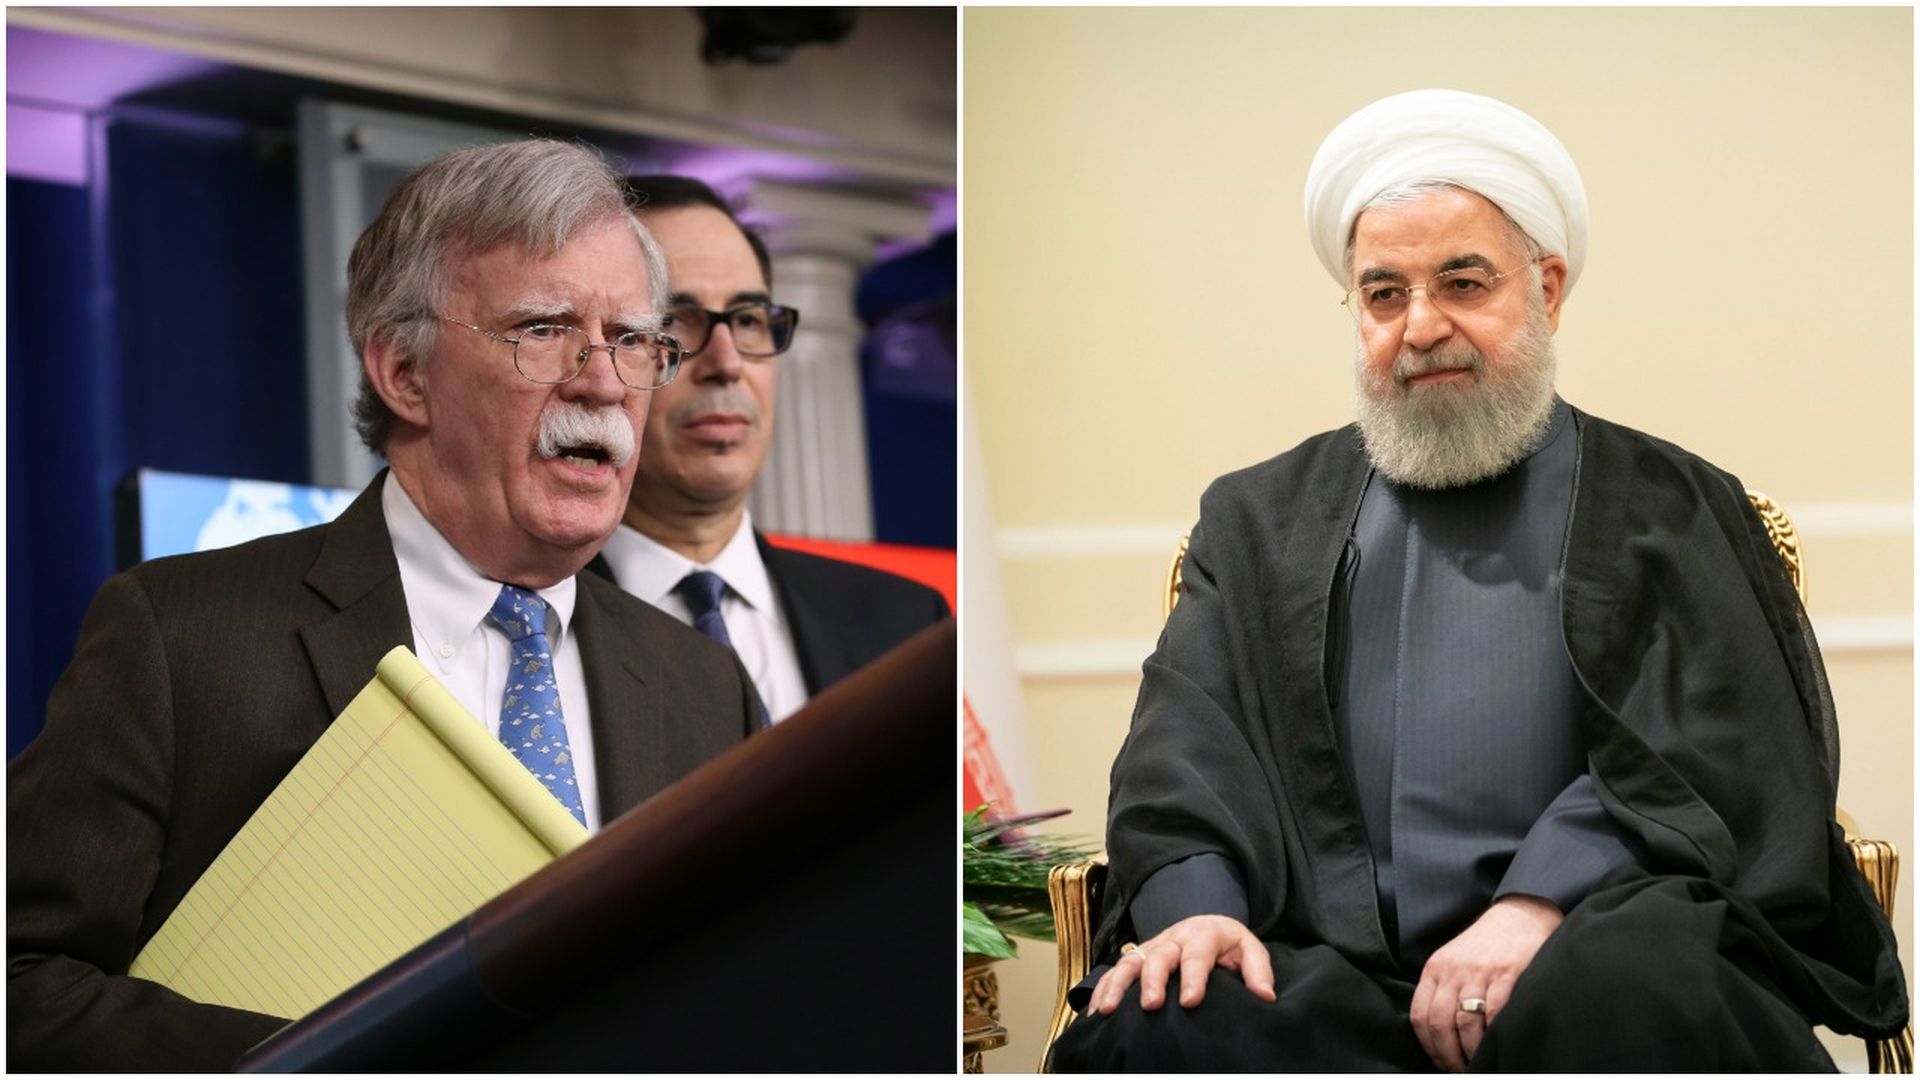 Collage of former national security adviser John Bolton and Iranian President Hassan Rouhani